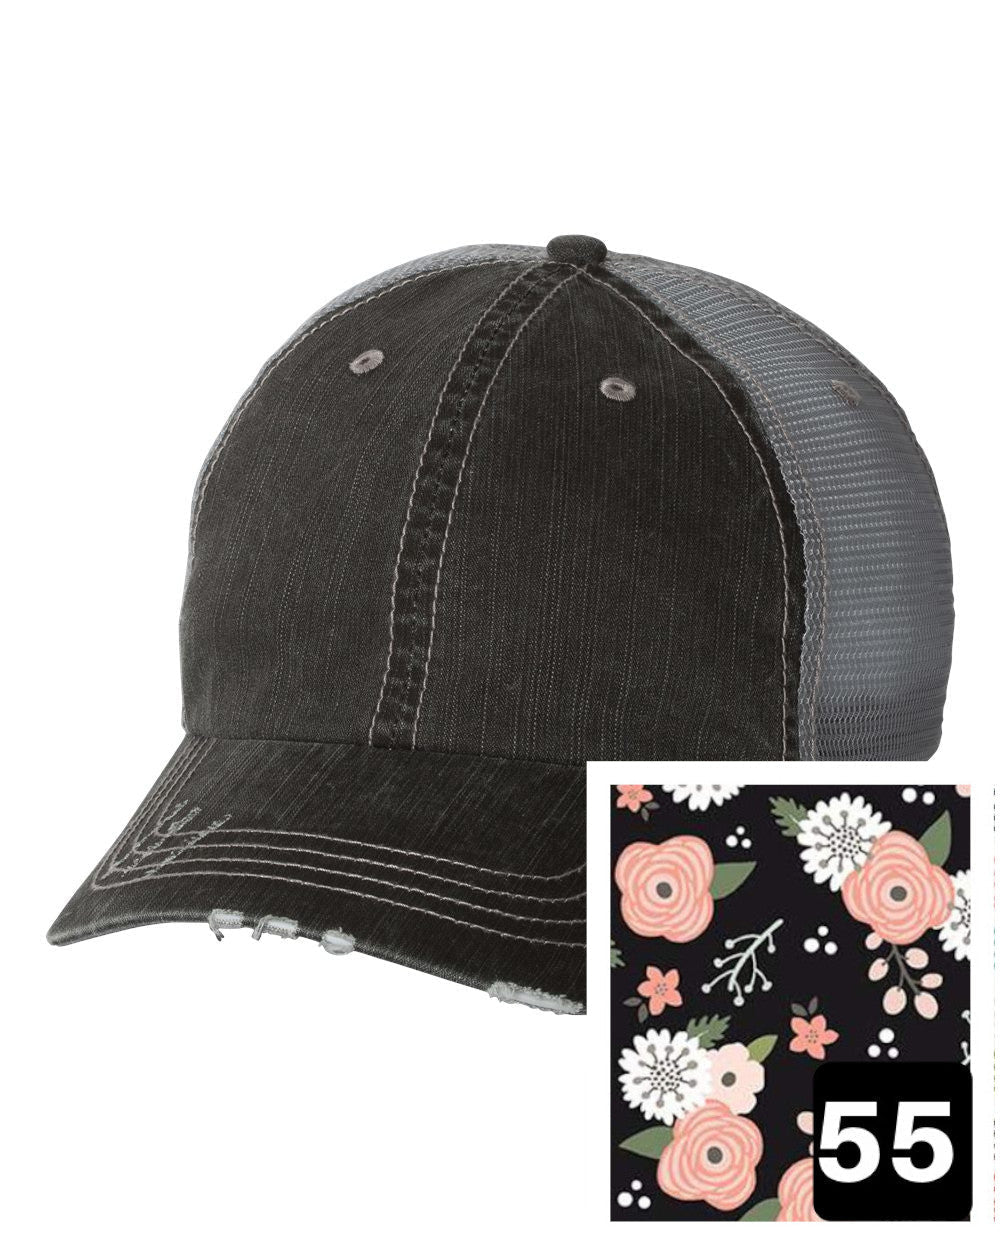 gray distressed trucker hat with petite floral on navy fabric state of Arkansas